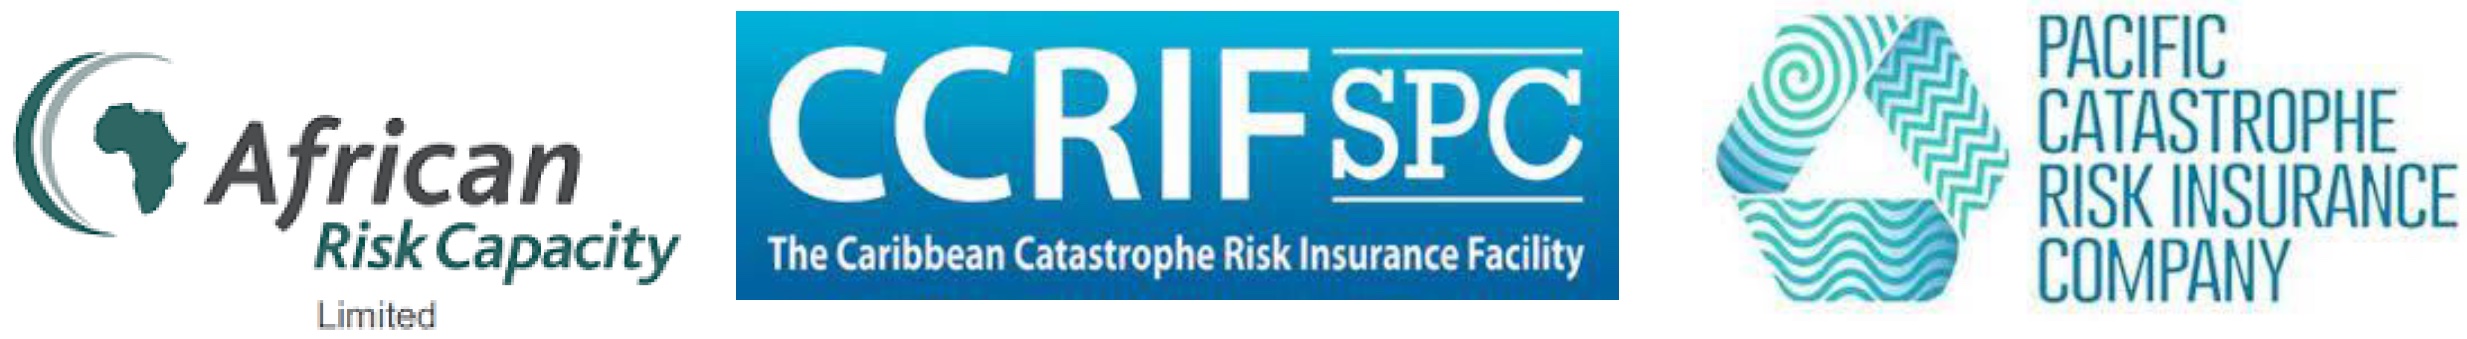 African Risk Capacity Limited (ARC Ltd.), CCRIF SPC (formerly The Caribbean Catastrophe Risk Insurance Facility) and Pacific Catastrophe Risk Insurance Company (PCRIC)